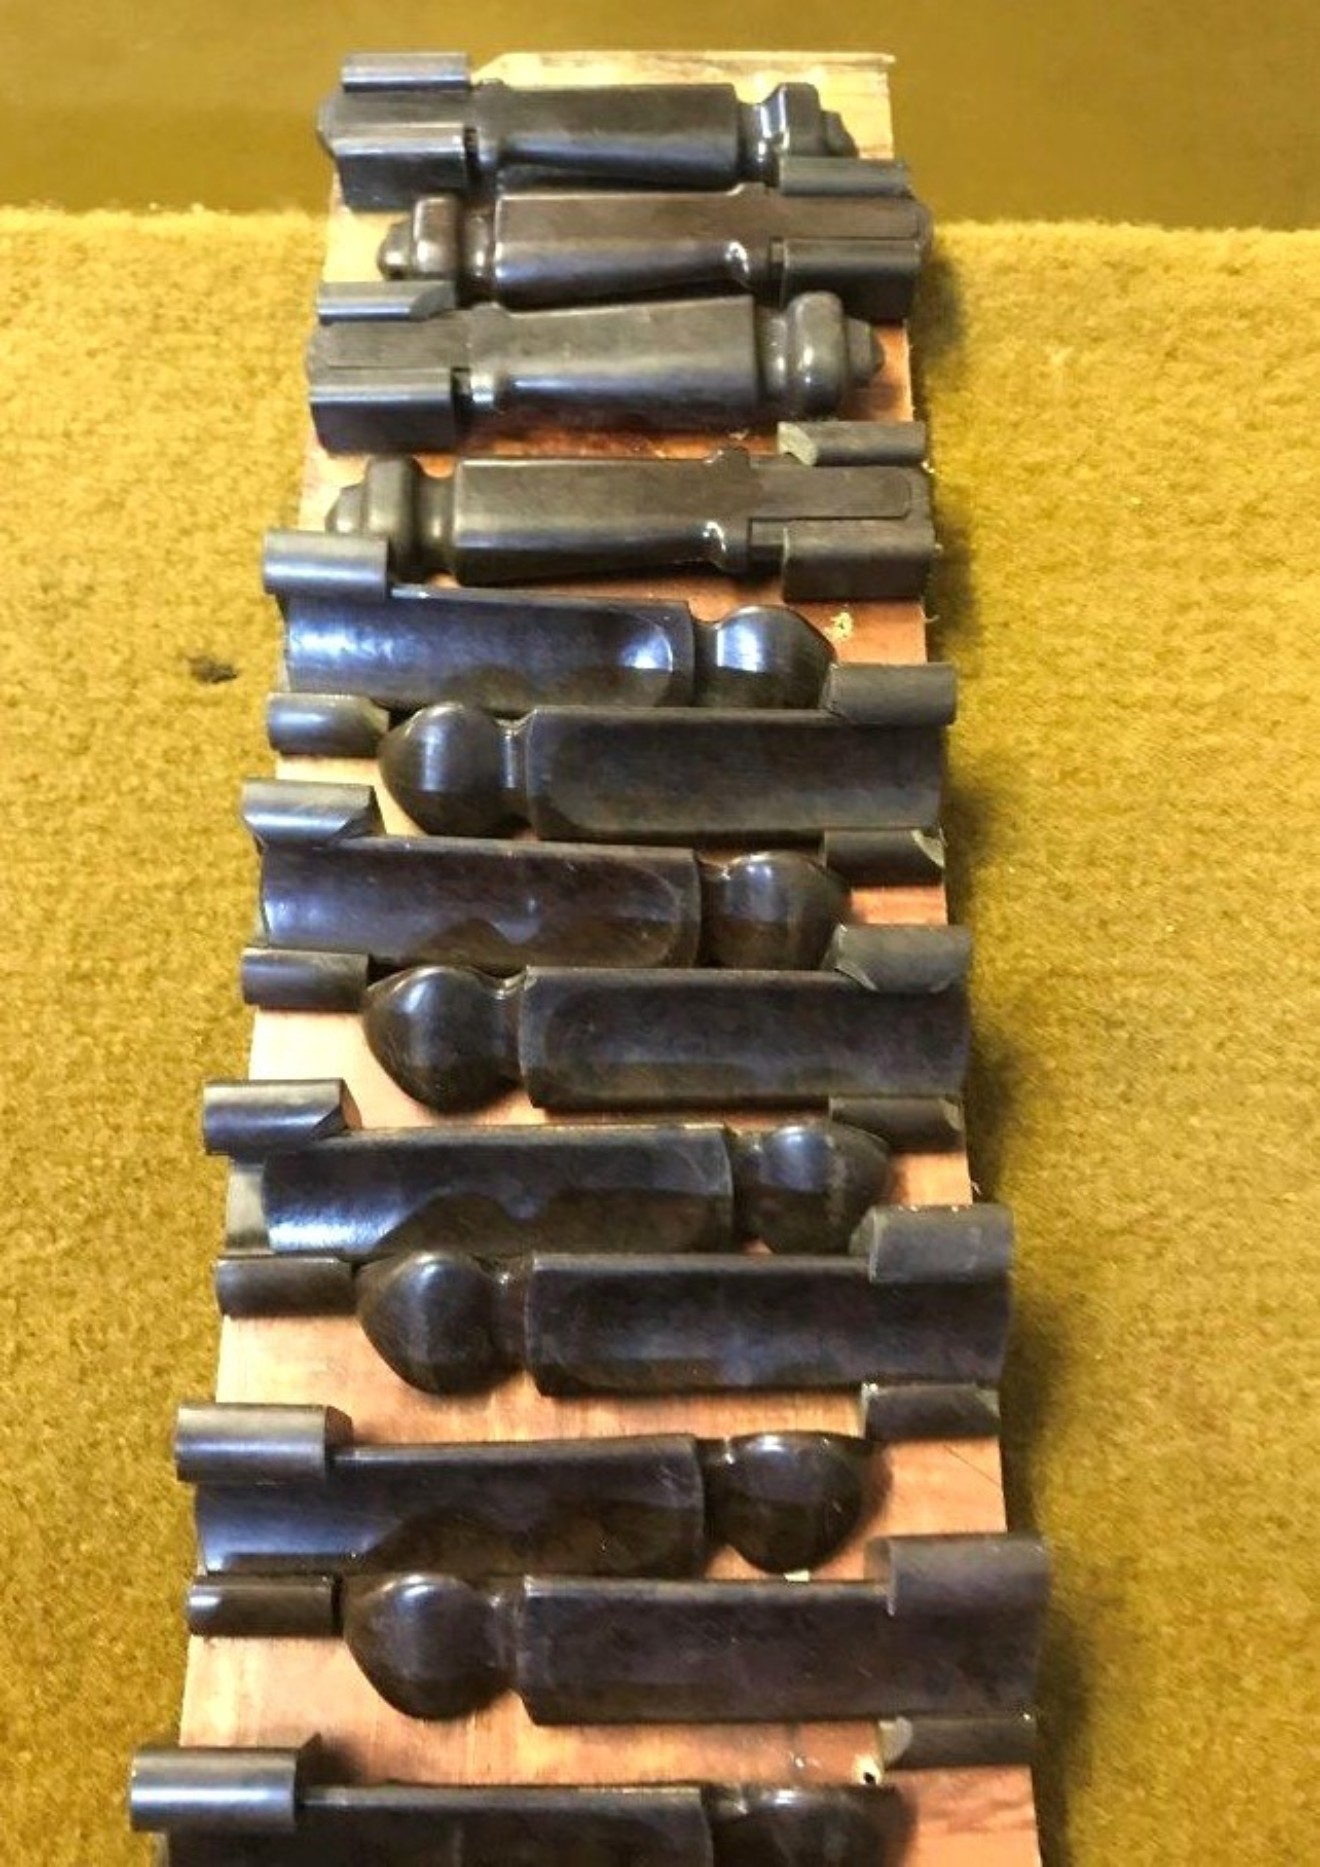 Vintage Job Lot of 19 Bakelite "The Sunbeam Clip Stair Carpet Clips and 4 "Byson" Runner Clips